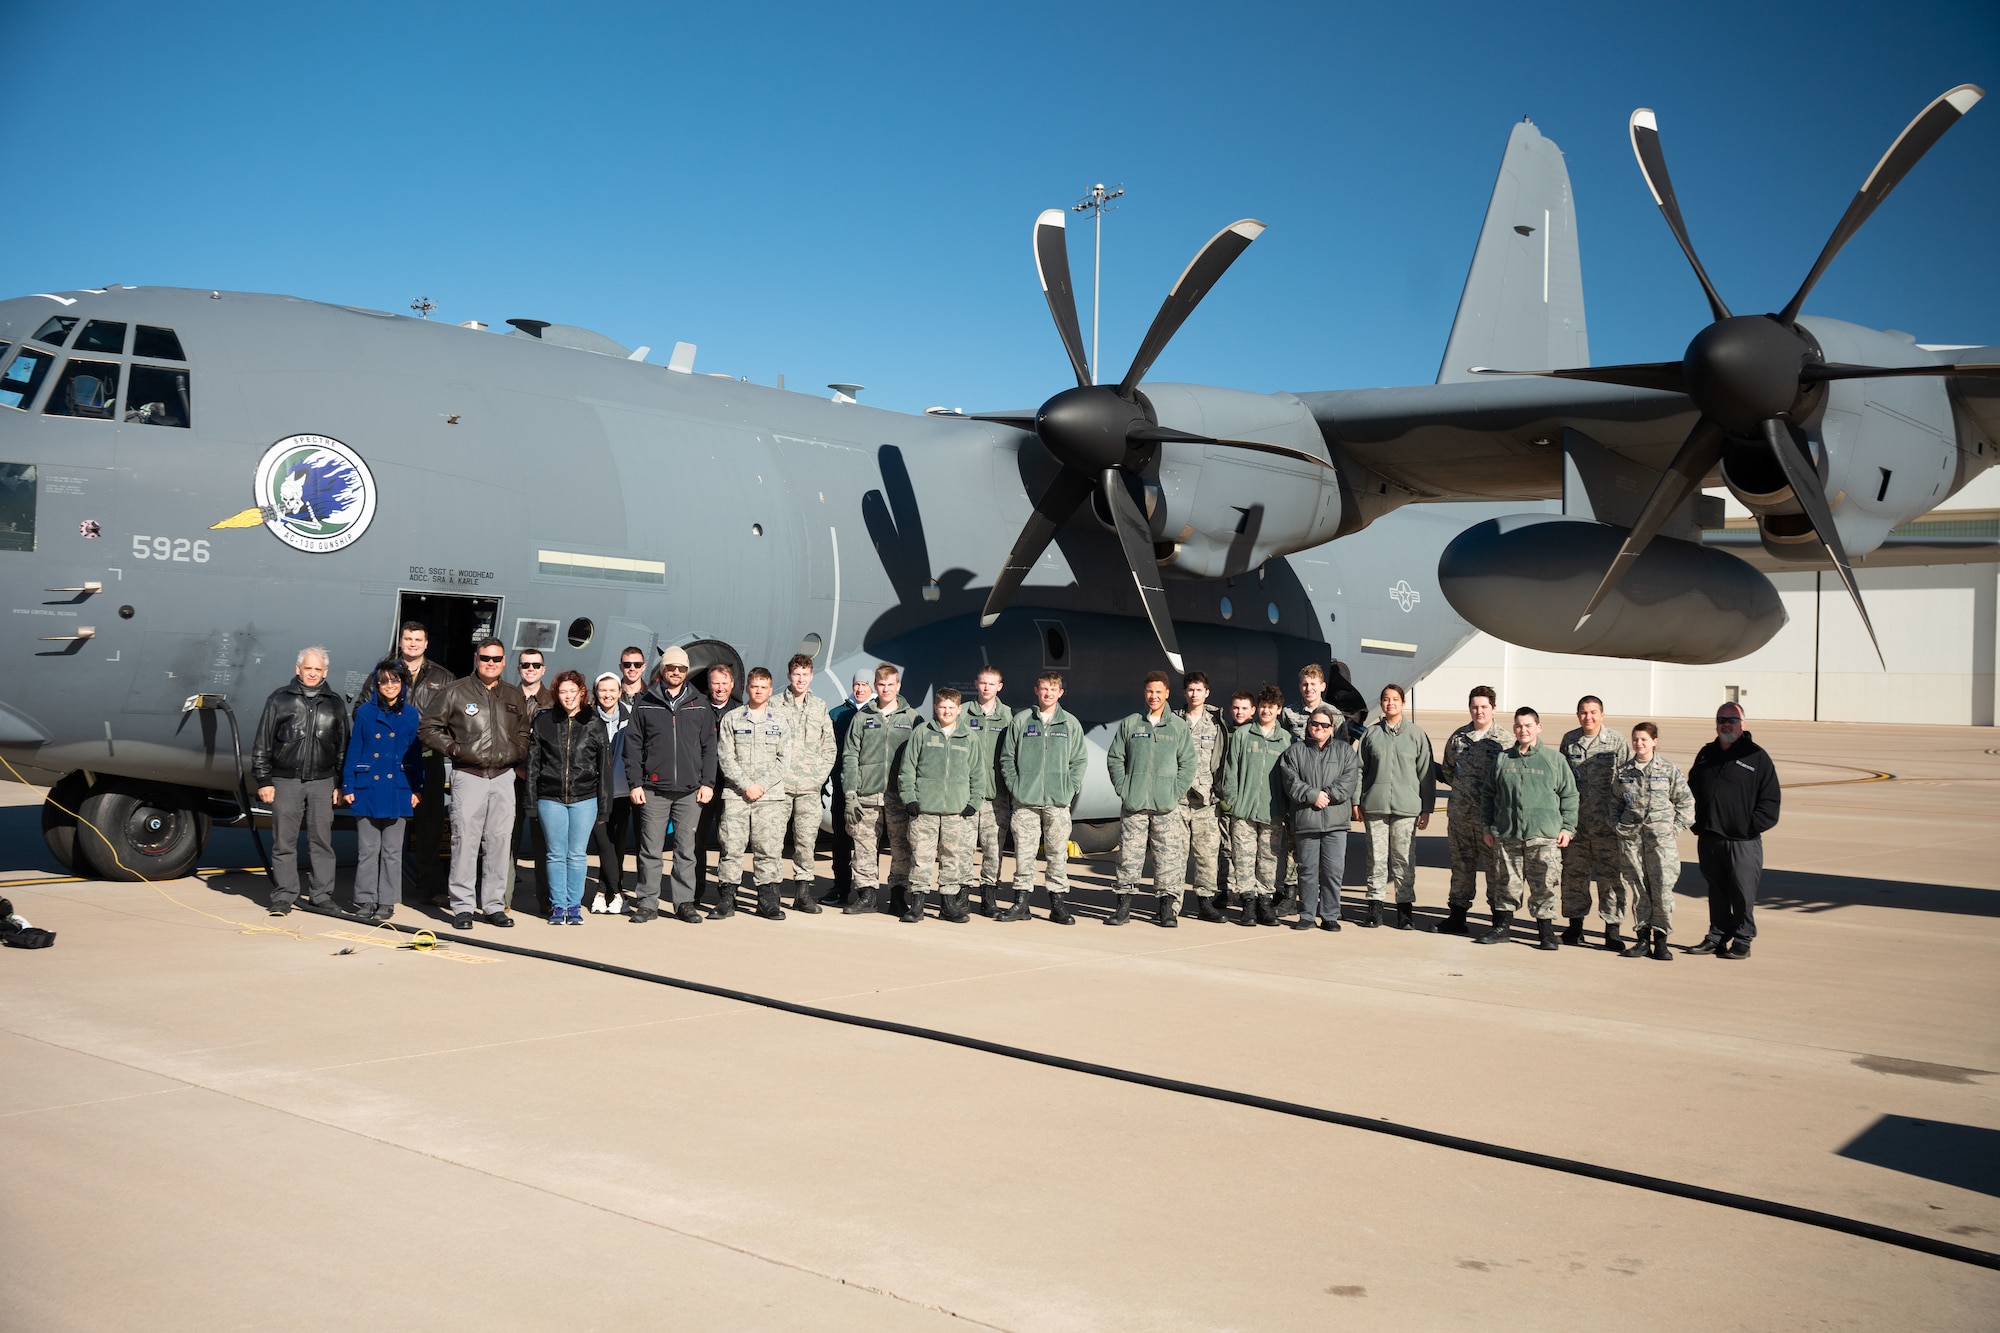 A group of young adults and adults in military uniform stand in front of a military aircraft for a group photo.